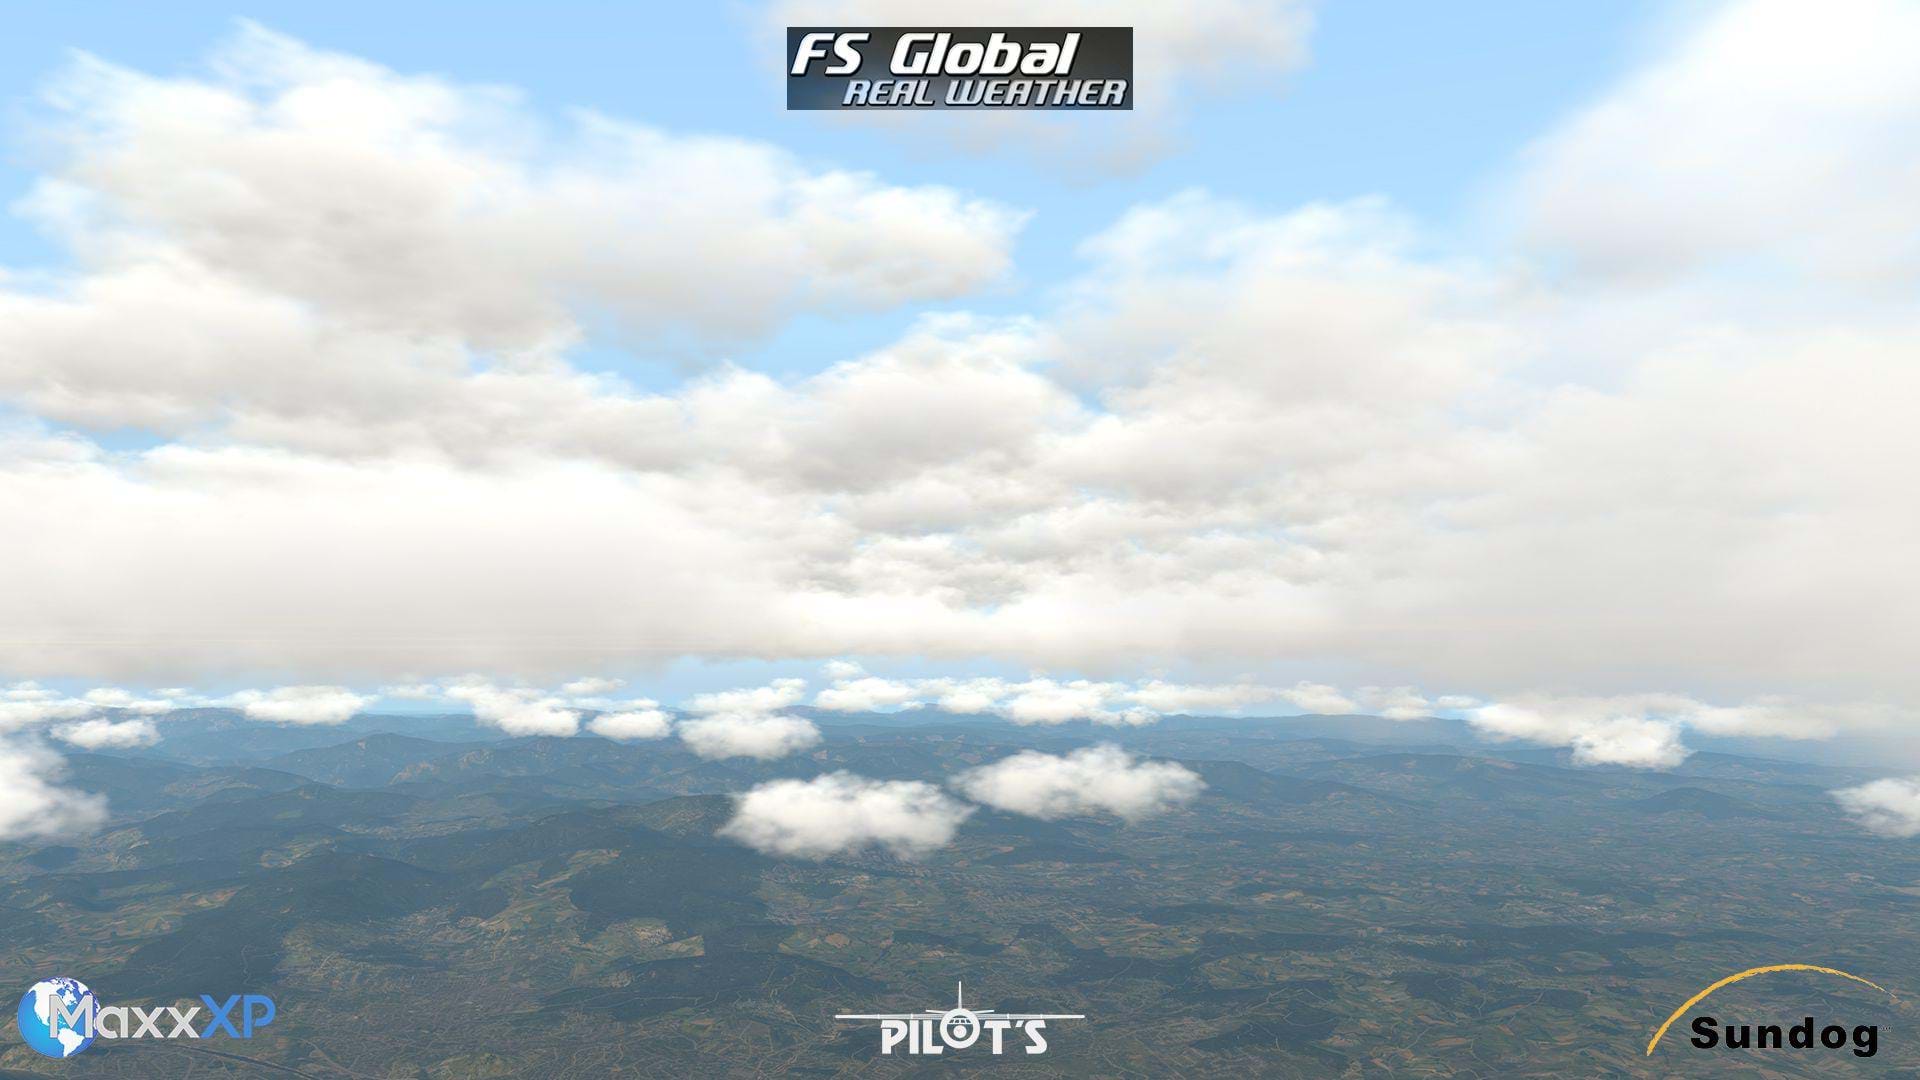 FS Global Real Weather to support SkyMaxx Pro